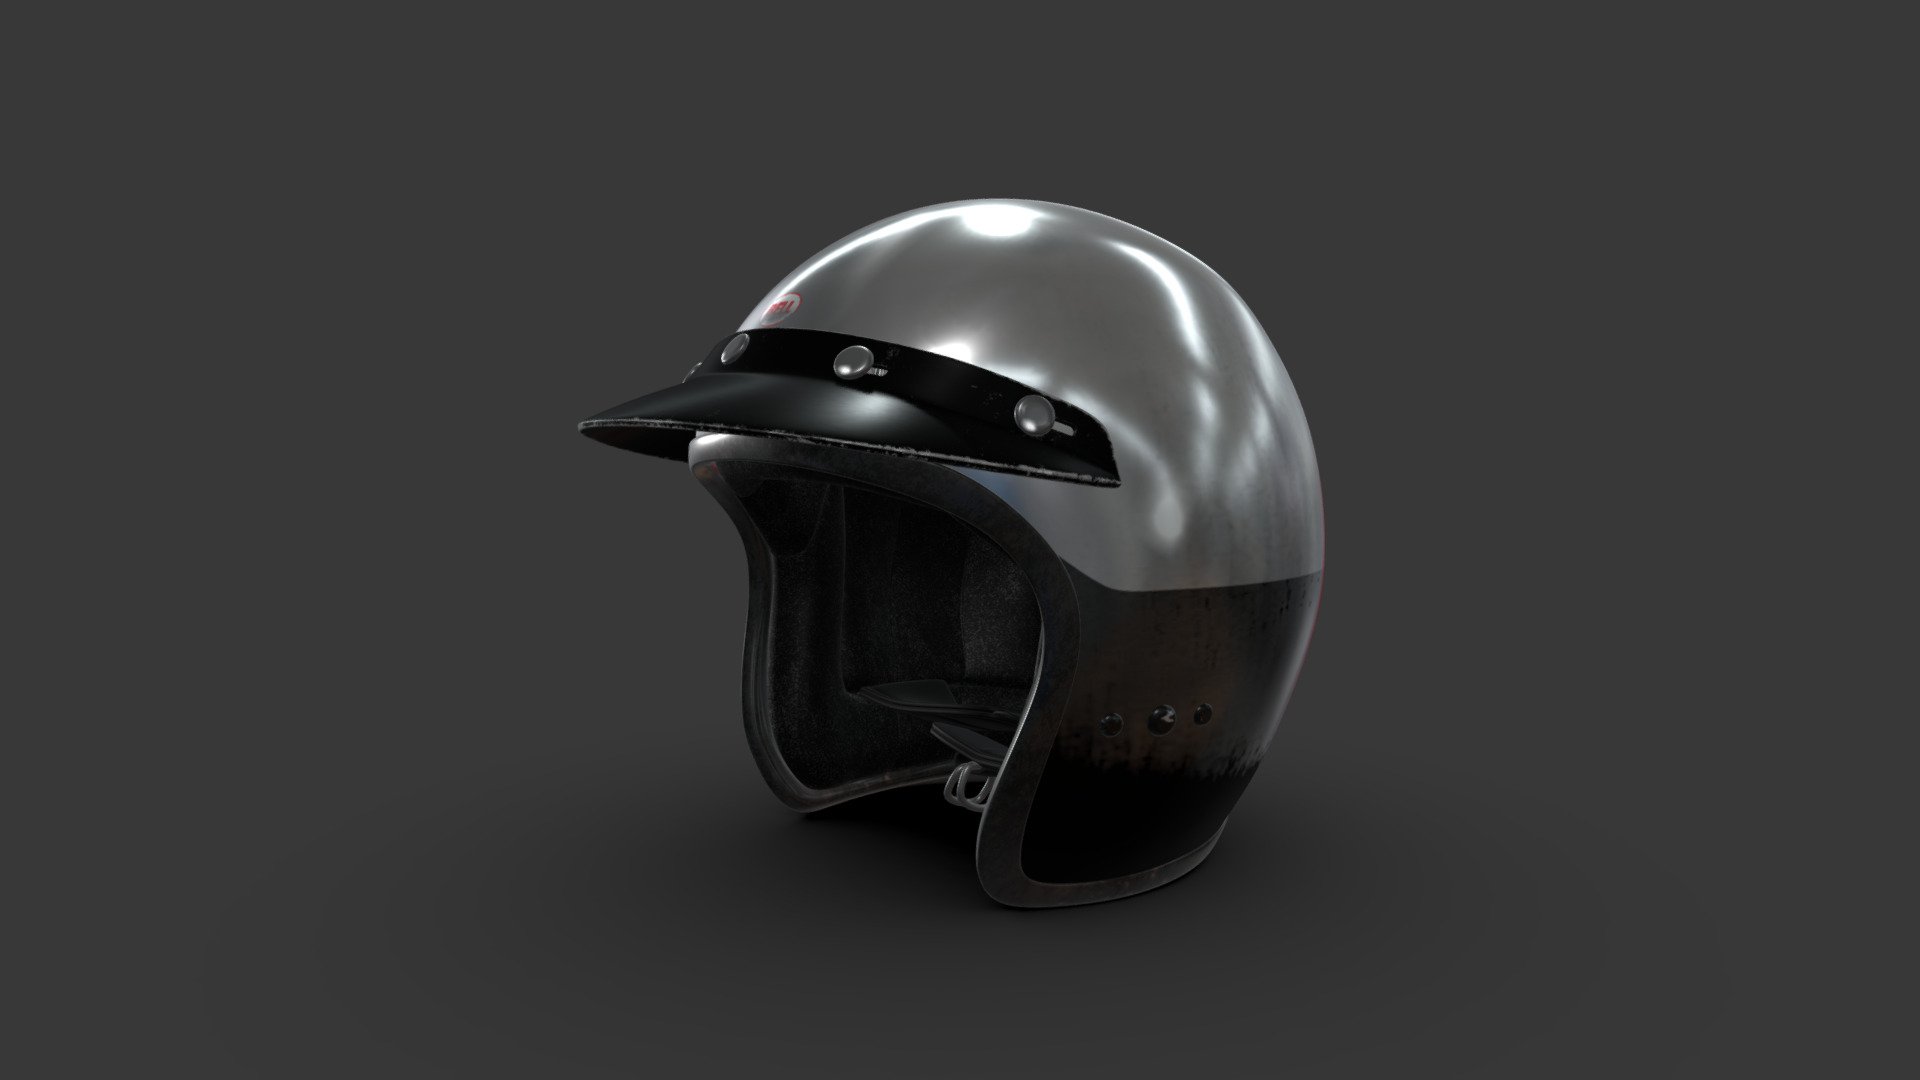 Classic F1 racing helmet 
Made in Cinema4D / .fbx file (textures in folder)

This is a Classic Formula 1 Motorsport helmet in silver
from the 60s.
The helmet design was also used by other Motorsport series,
for example LeMans or Ralley Sport 3d model